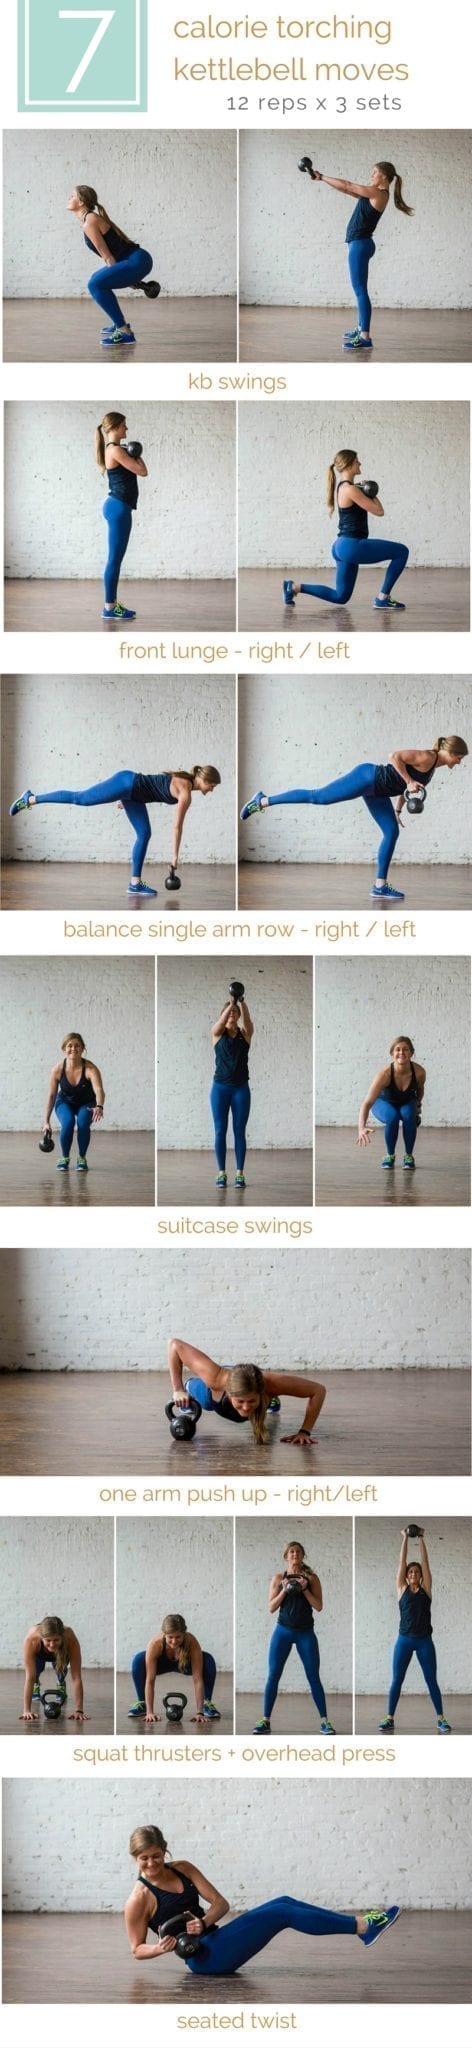 7 calorie torching kettlebell moves + hiit workout | torch calories while simultaneously strengthening your entire body with this killer kettlebell workout. do it reps + sets style or amrap style; either way it's an effective, high intensity 20-minute workout! | www.nourishmovelove.com